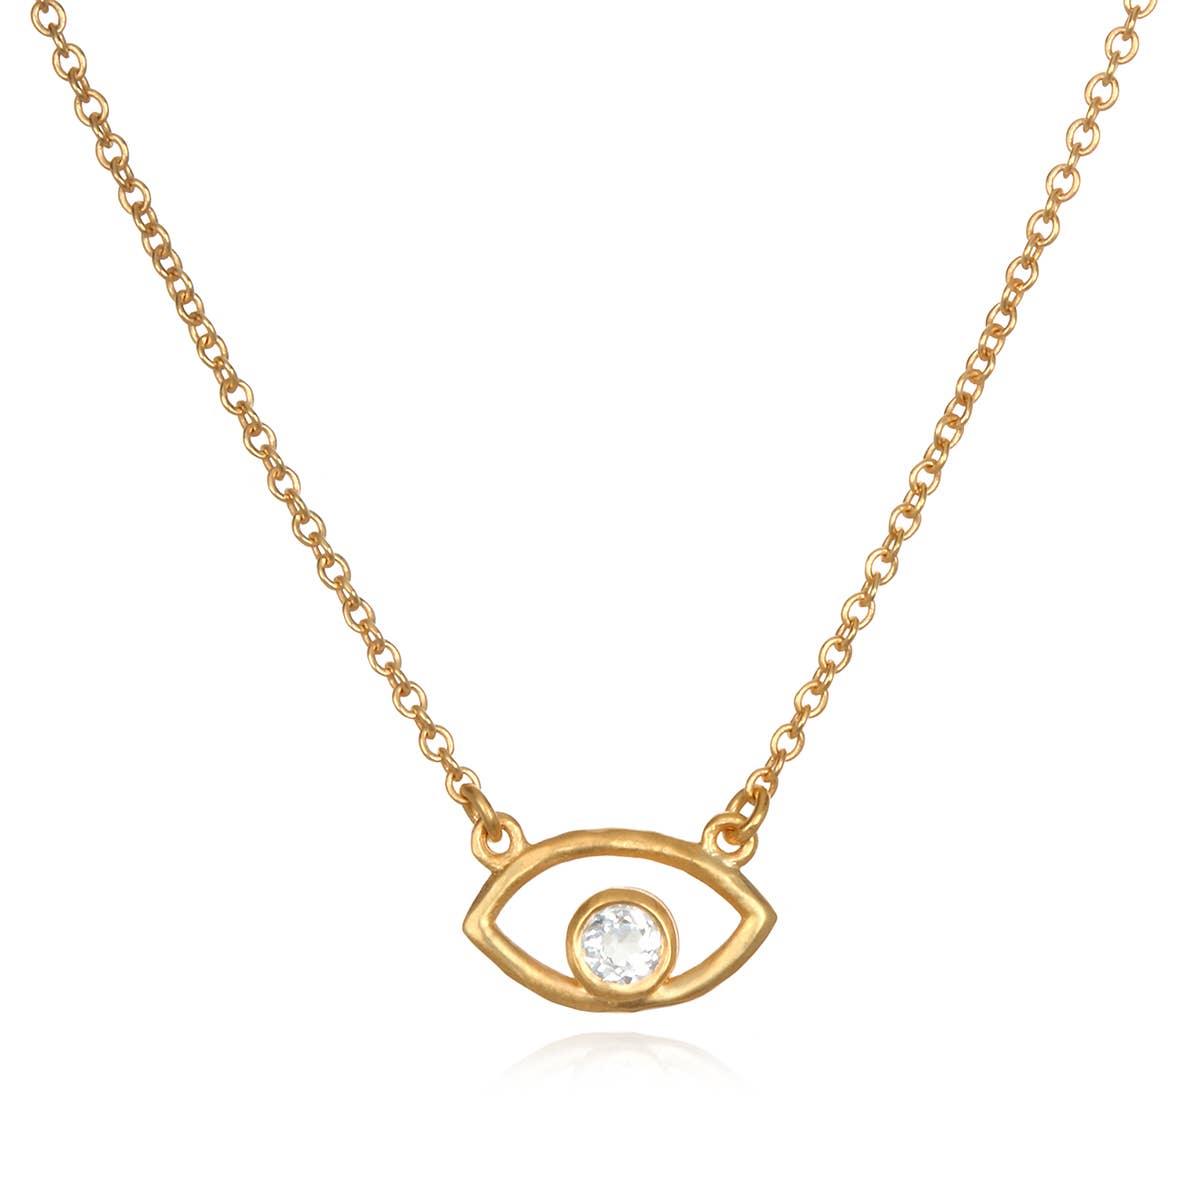 White Topaz Gold Eye Necklace 18-inch, 18kt gold plated over brass - Abigail Fox Designs